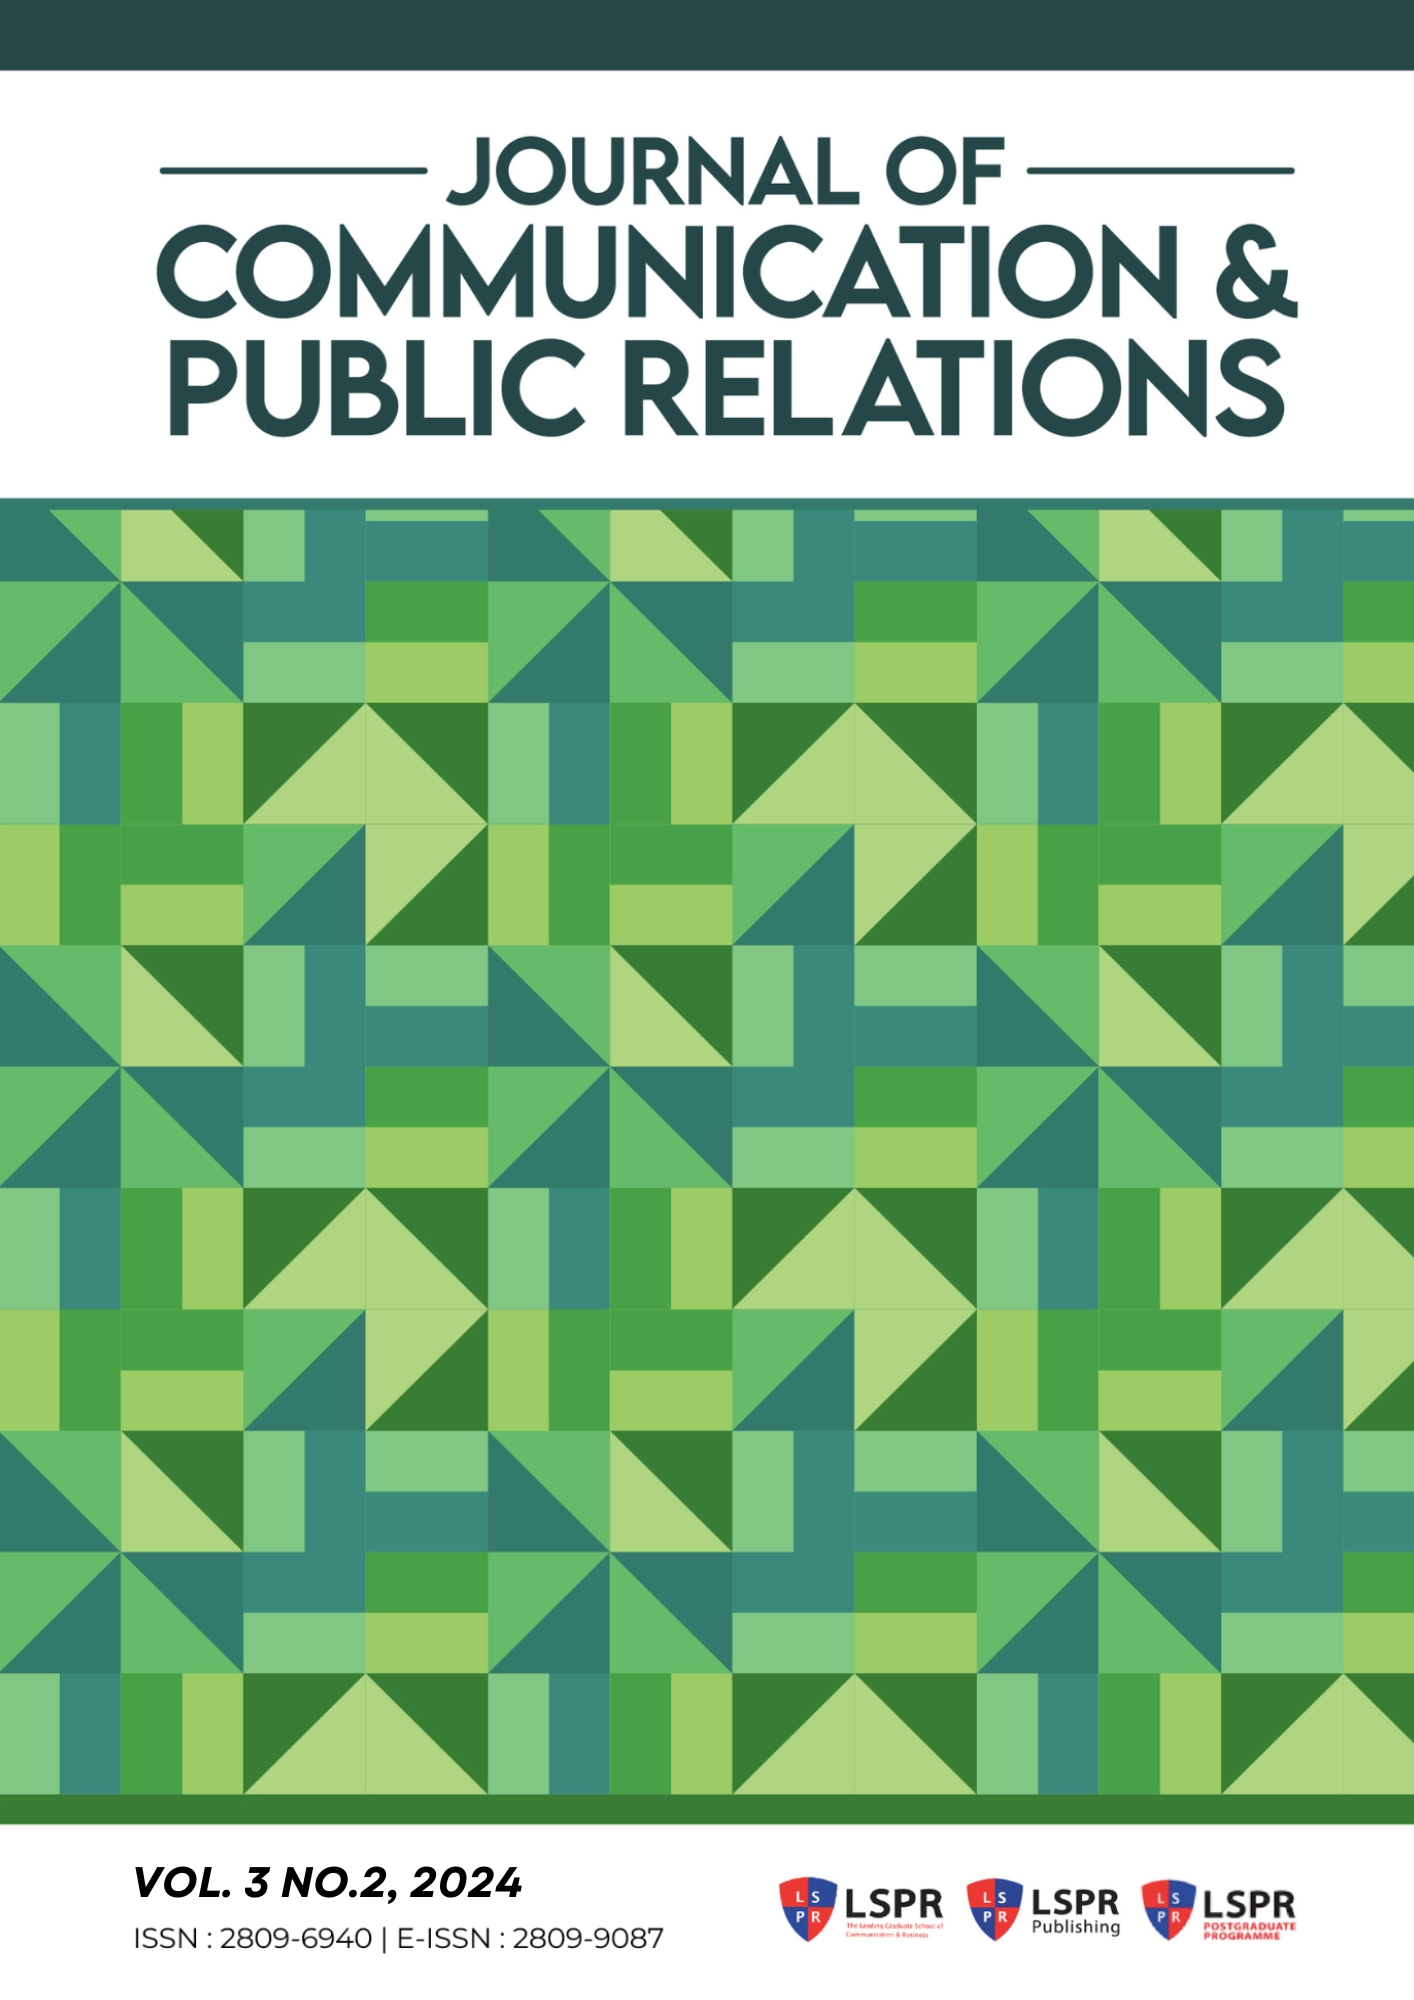 					View Vol. 3 No. 2 (2024): Journal of Communication & Public Relations
				